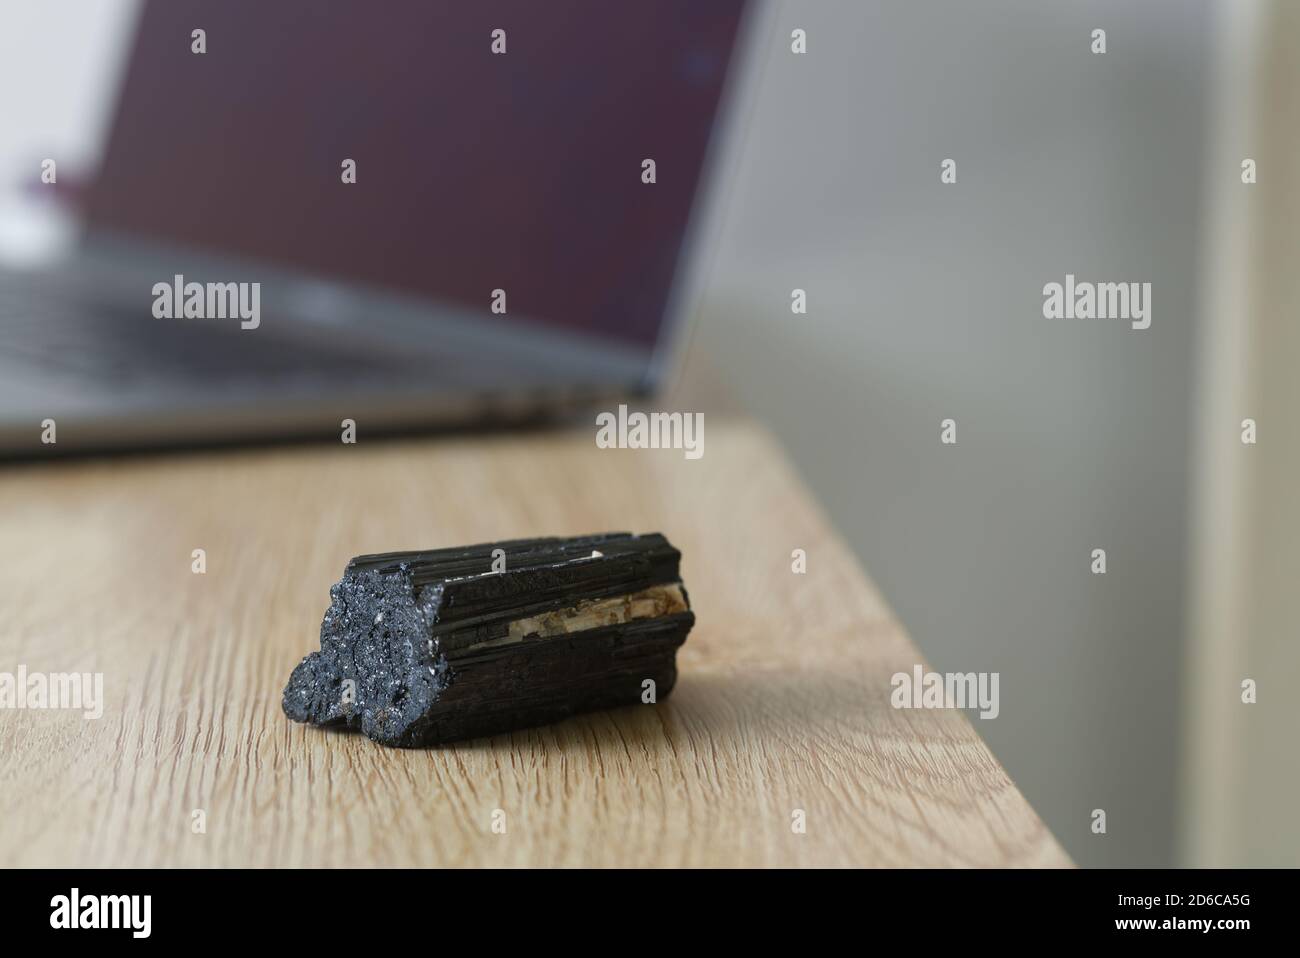 Tourmaline stone in an office to protect against Electromagnetic field ( EMF ). Stock Photo